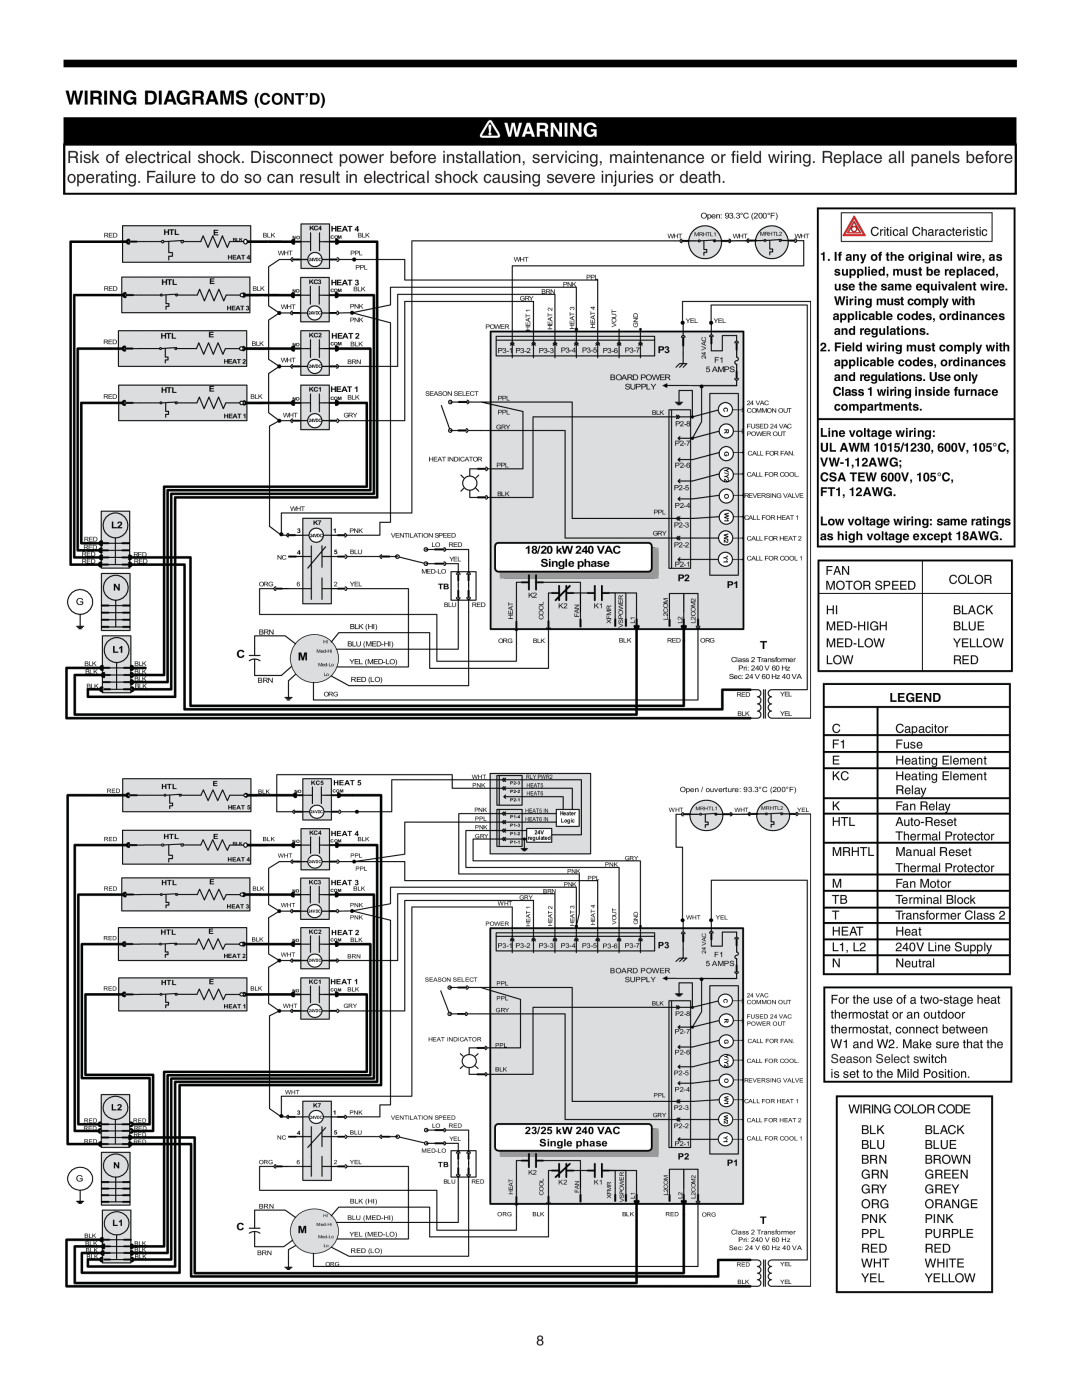 Broan 30042432A warranty Wiring Diagrams Cont’D, Line voltage wiring, UL AWM 1015/1230, 600V, 105C, VW-1,12AWG 